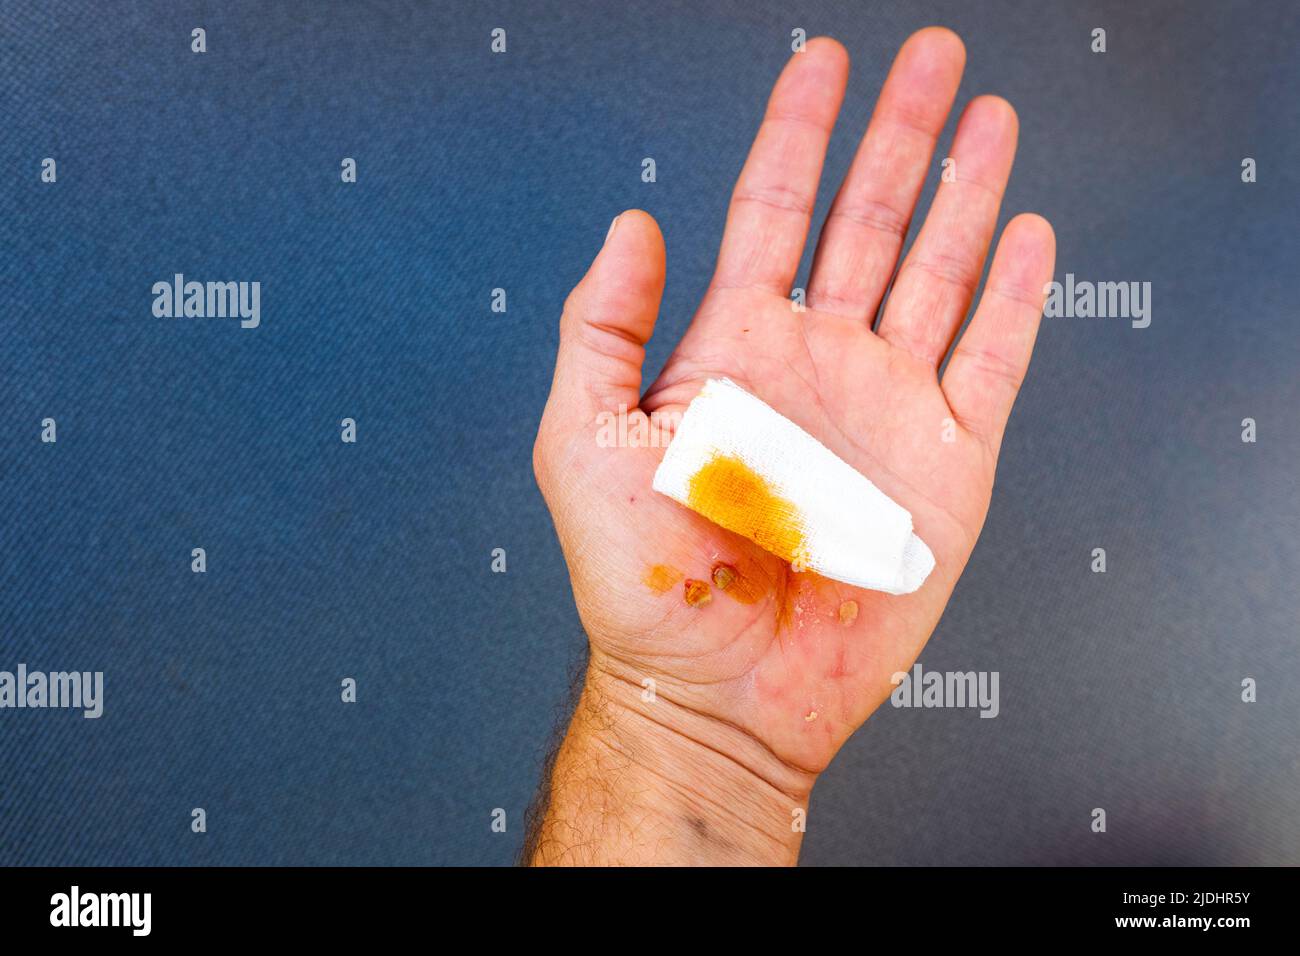 Injured palm with wounds and scratches, disinfected with iodine to prevent infection. Stock Photo